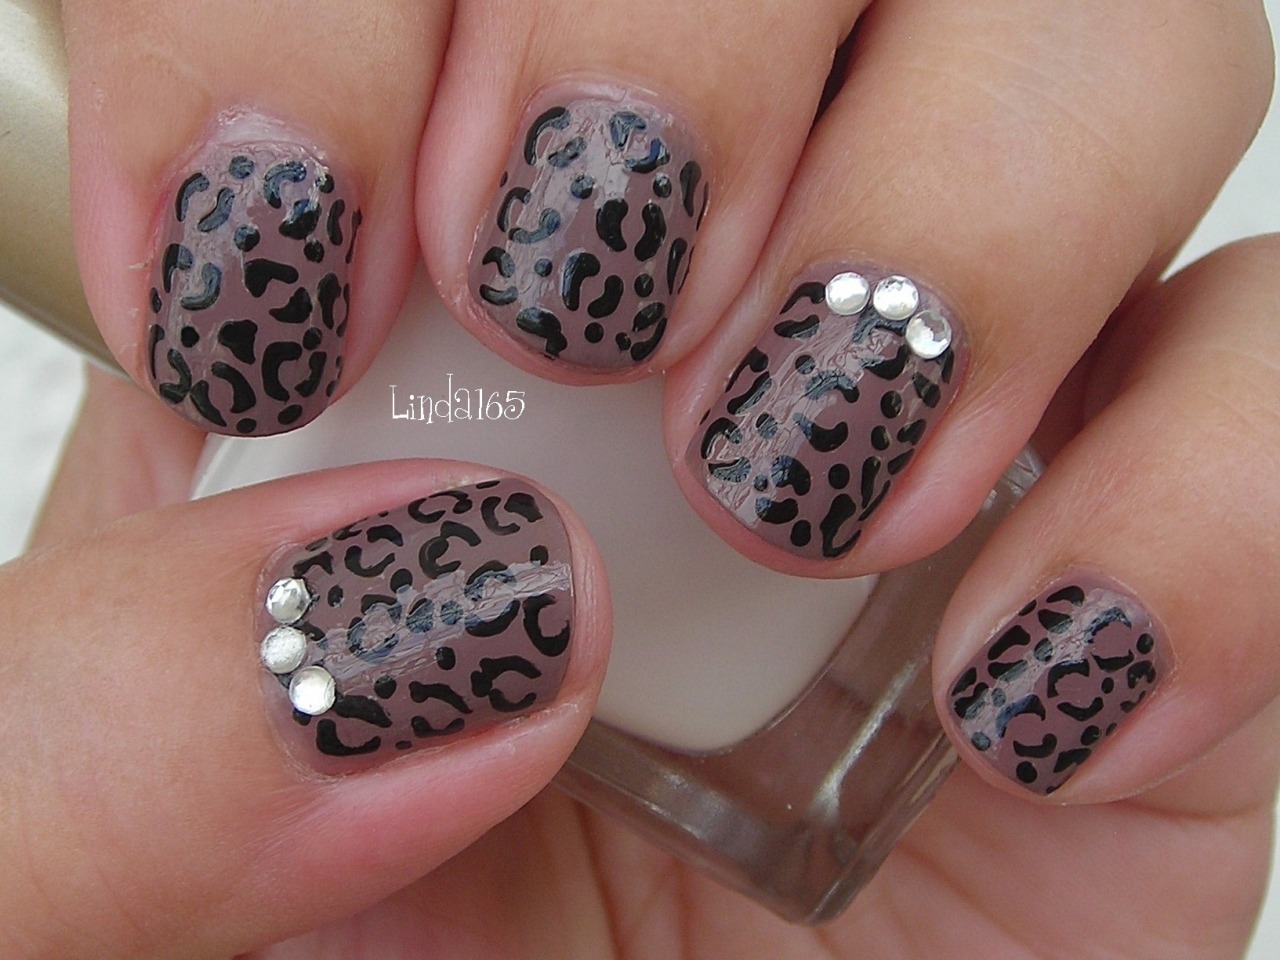 5. Easy Cheetah Nail Designs on Pinterest - wide 8